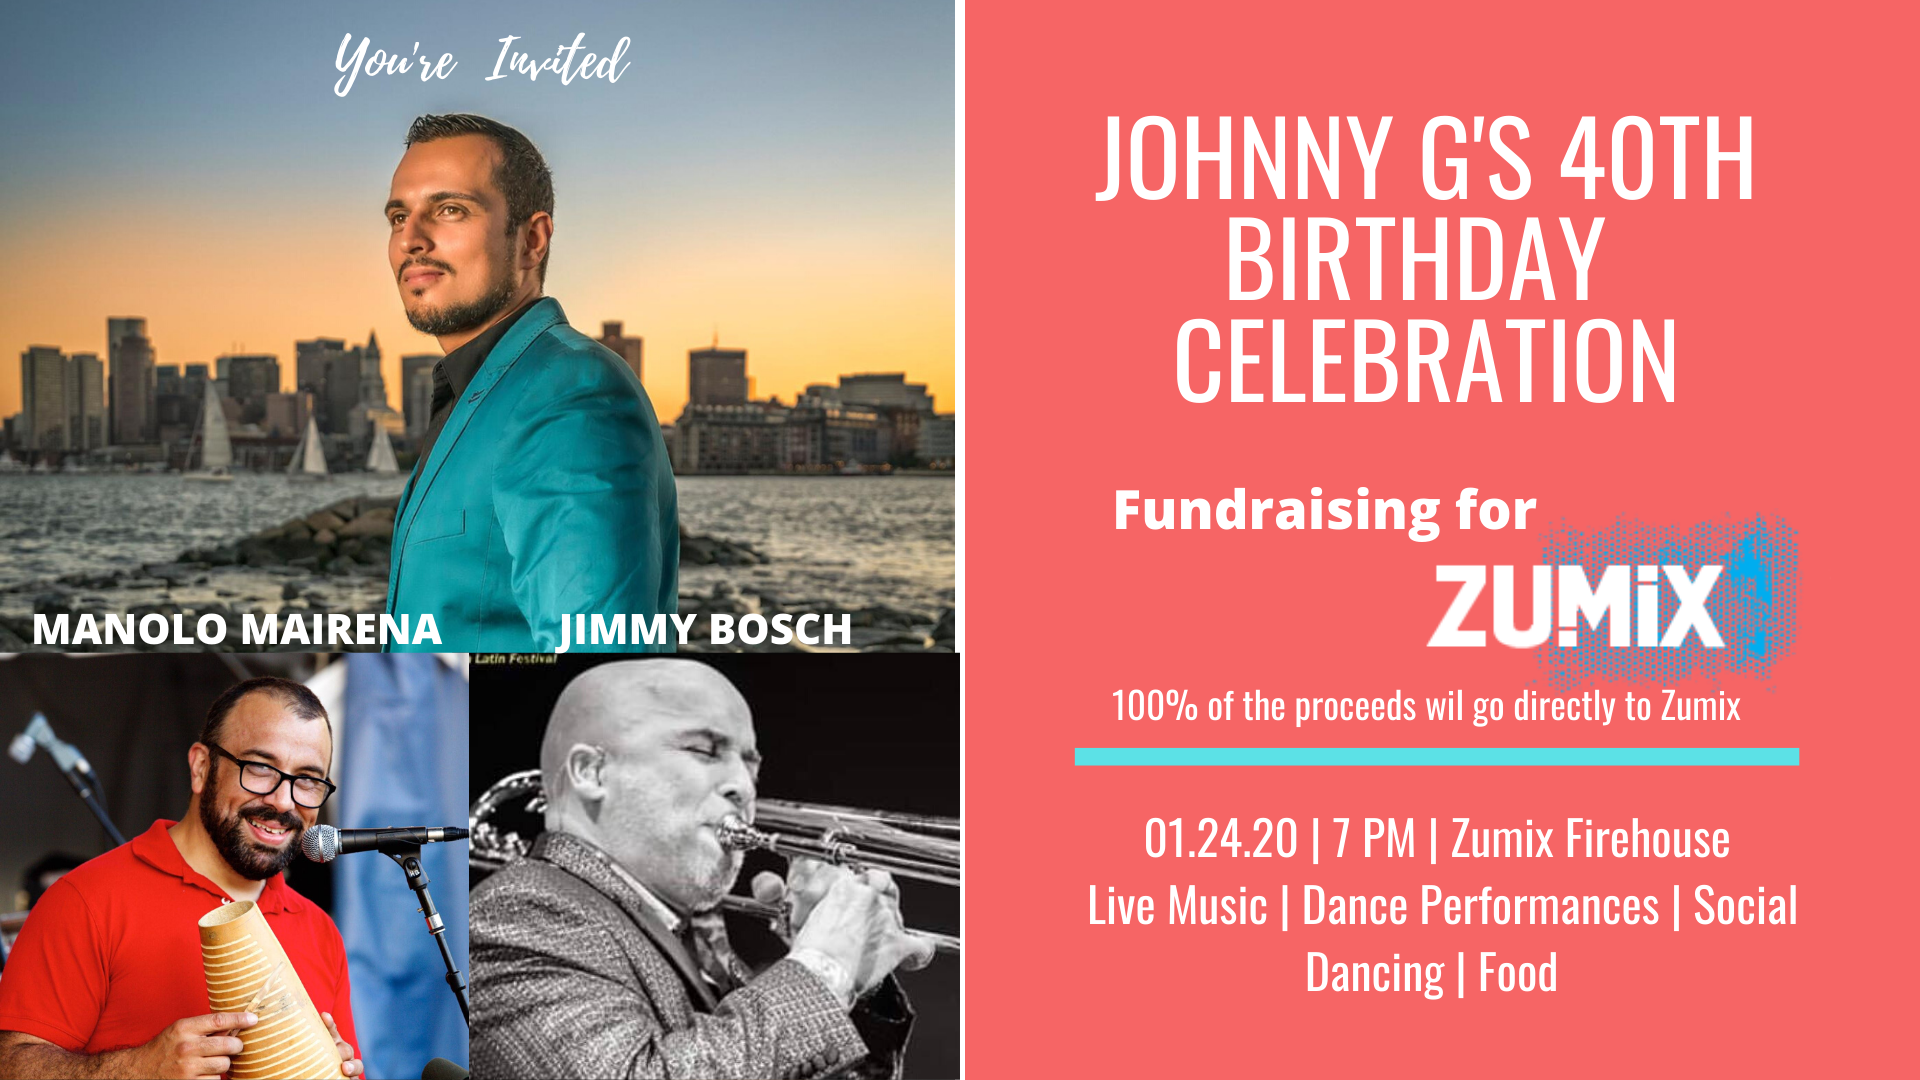 Celebrate Johnny G's 40th Birthday with Manolo Mairena and Special Guest Jimmy Bosch a Fundraiser for Zumix